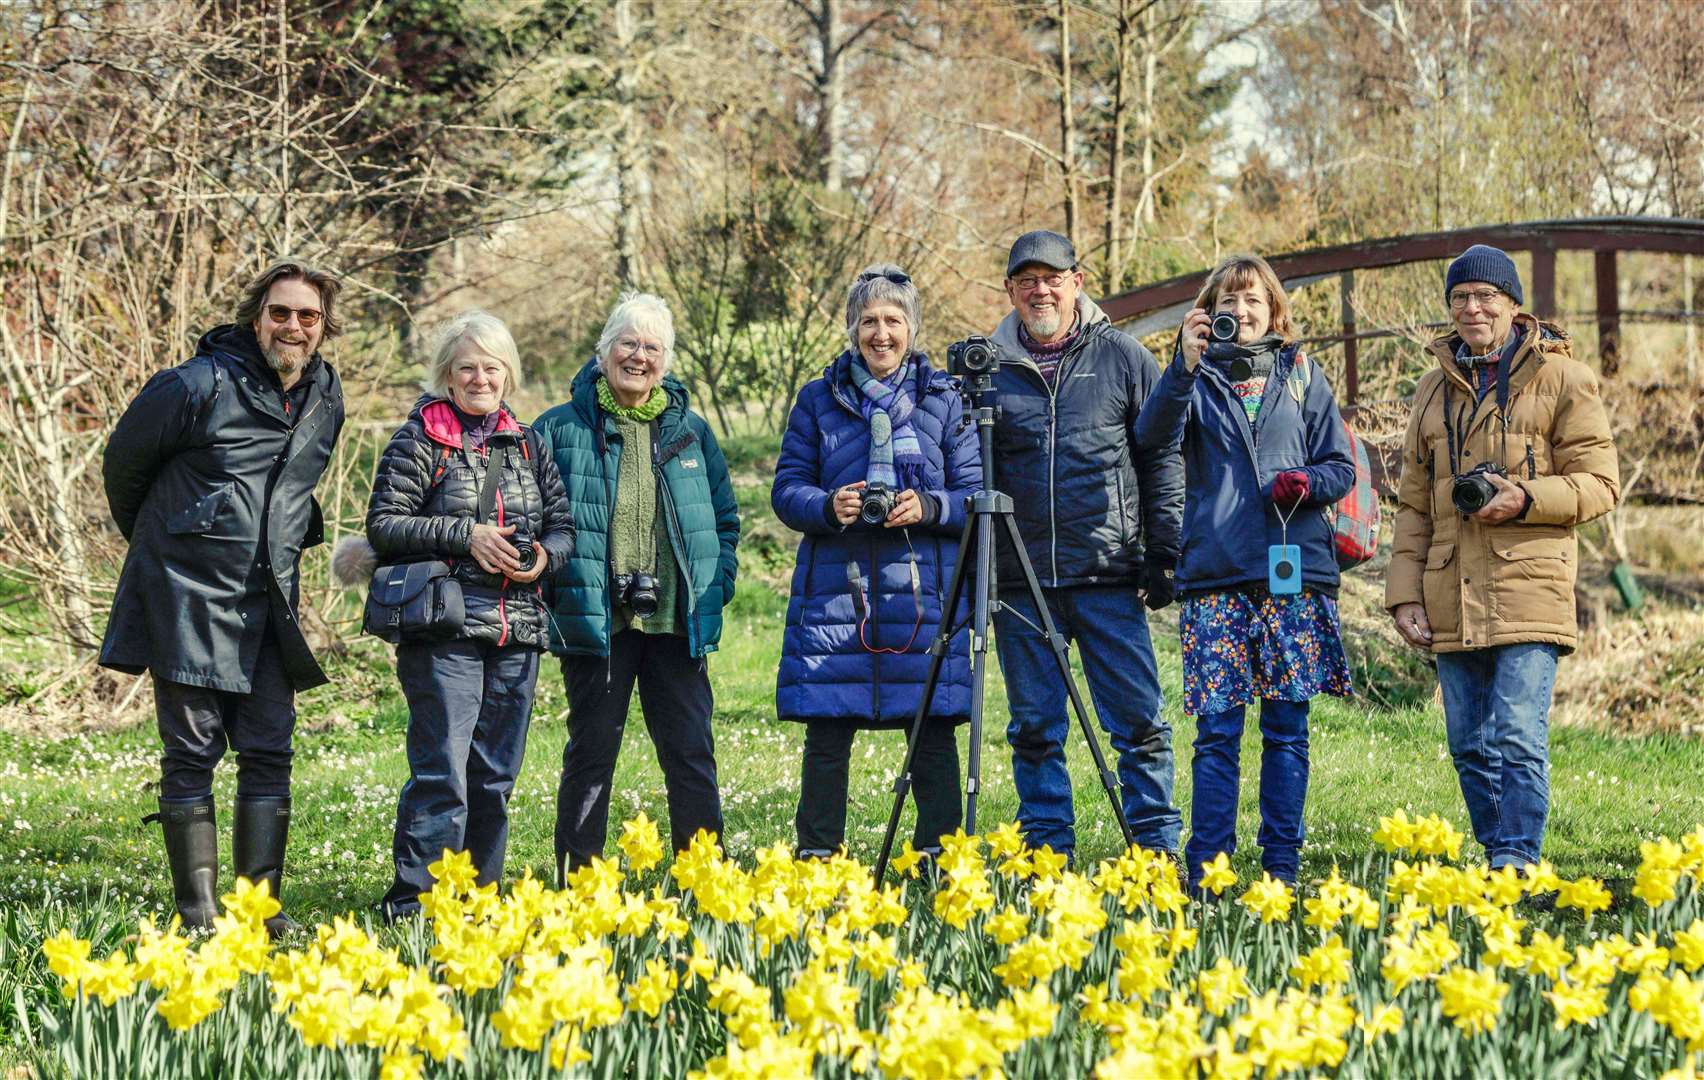 The group at Burgie Arboretum.  Left to right: Nick Gibbons, Agnes Gardiner, Jana Hutt, Ruth Whitfield, Howard Davenport, Nichola Jones and Tony Pinner...Pictured: Nick Gibbons.